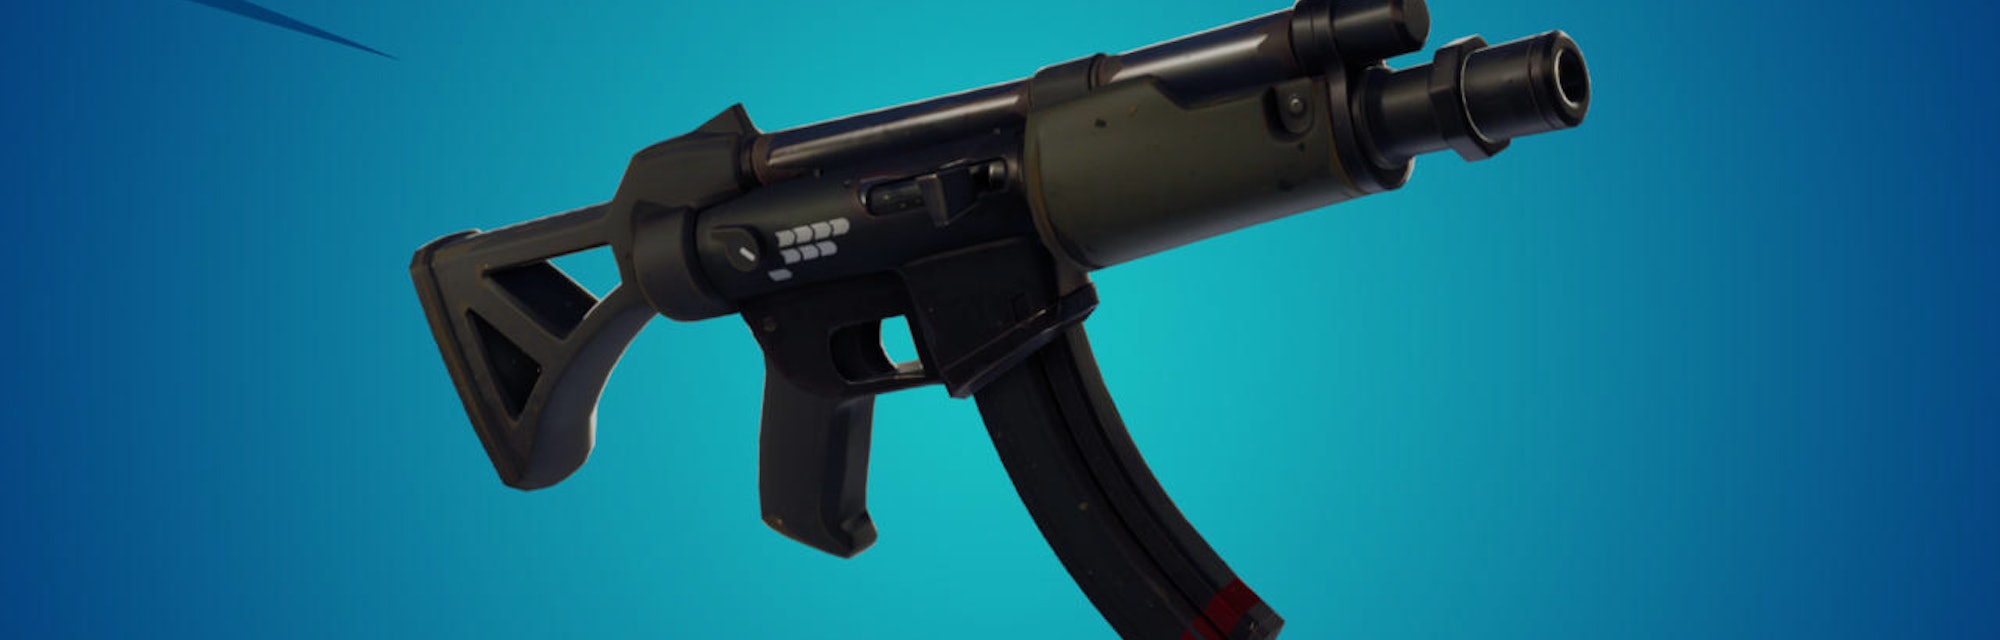 Fortnite Submachine Gun Replaces Tactical Smg Stats Rarity And Damage